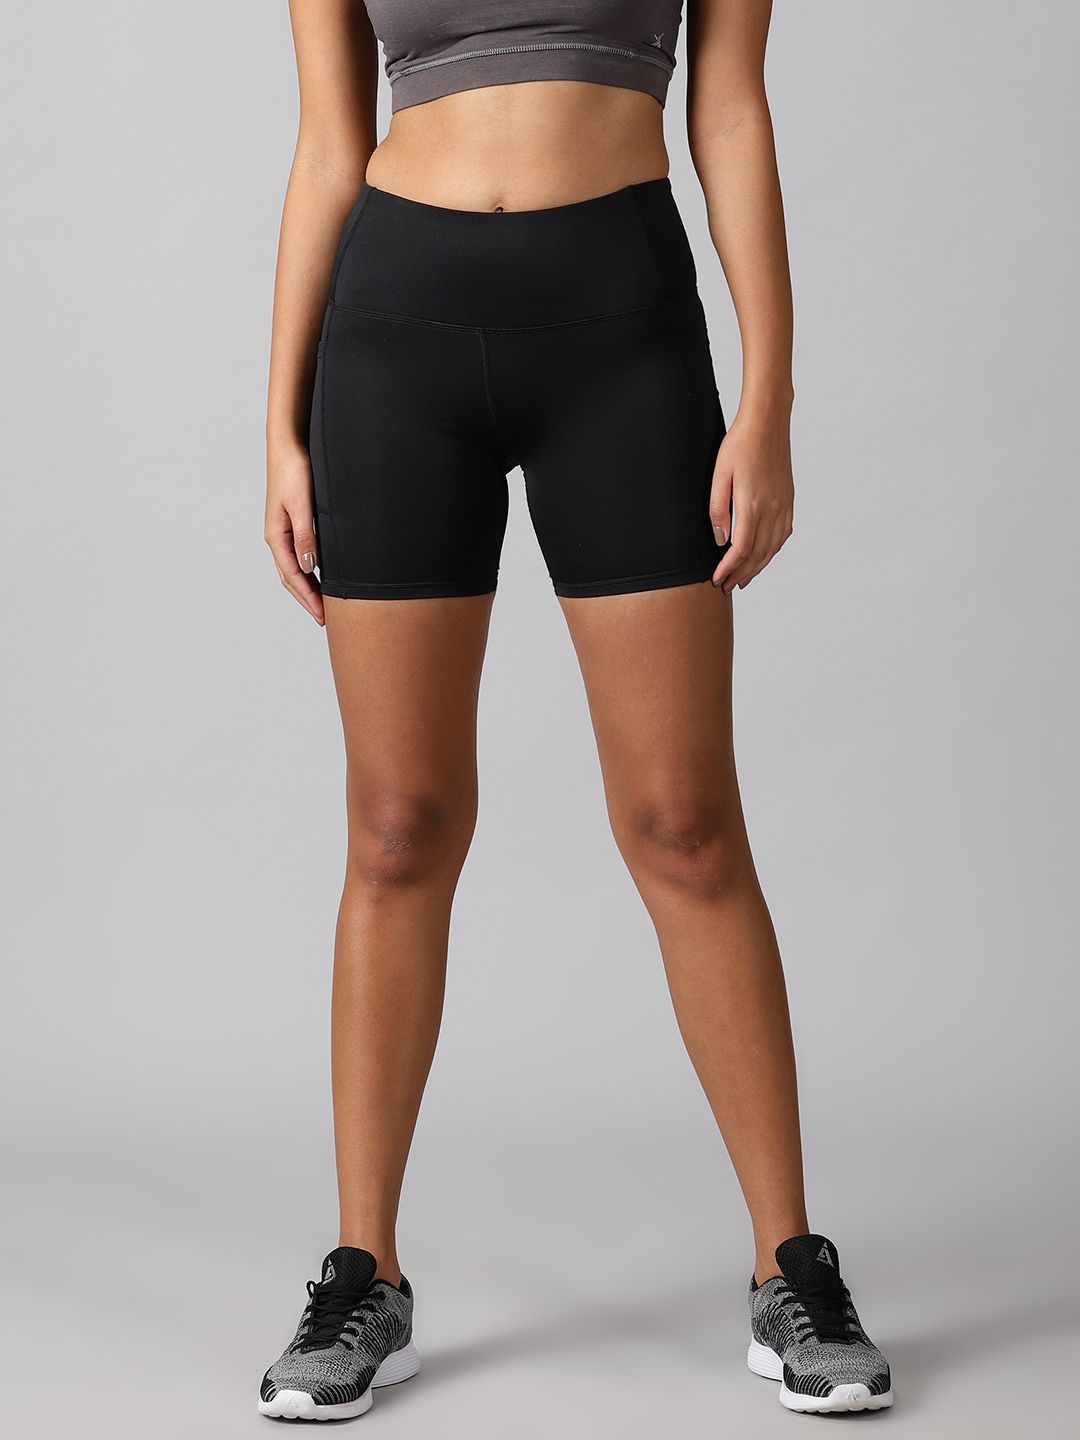 The Short Store Women Skinny Fit High-Rise Training or Gym Sports Shorts Price in India